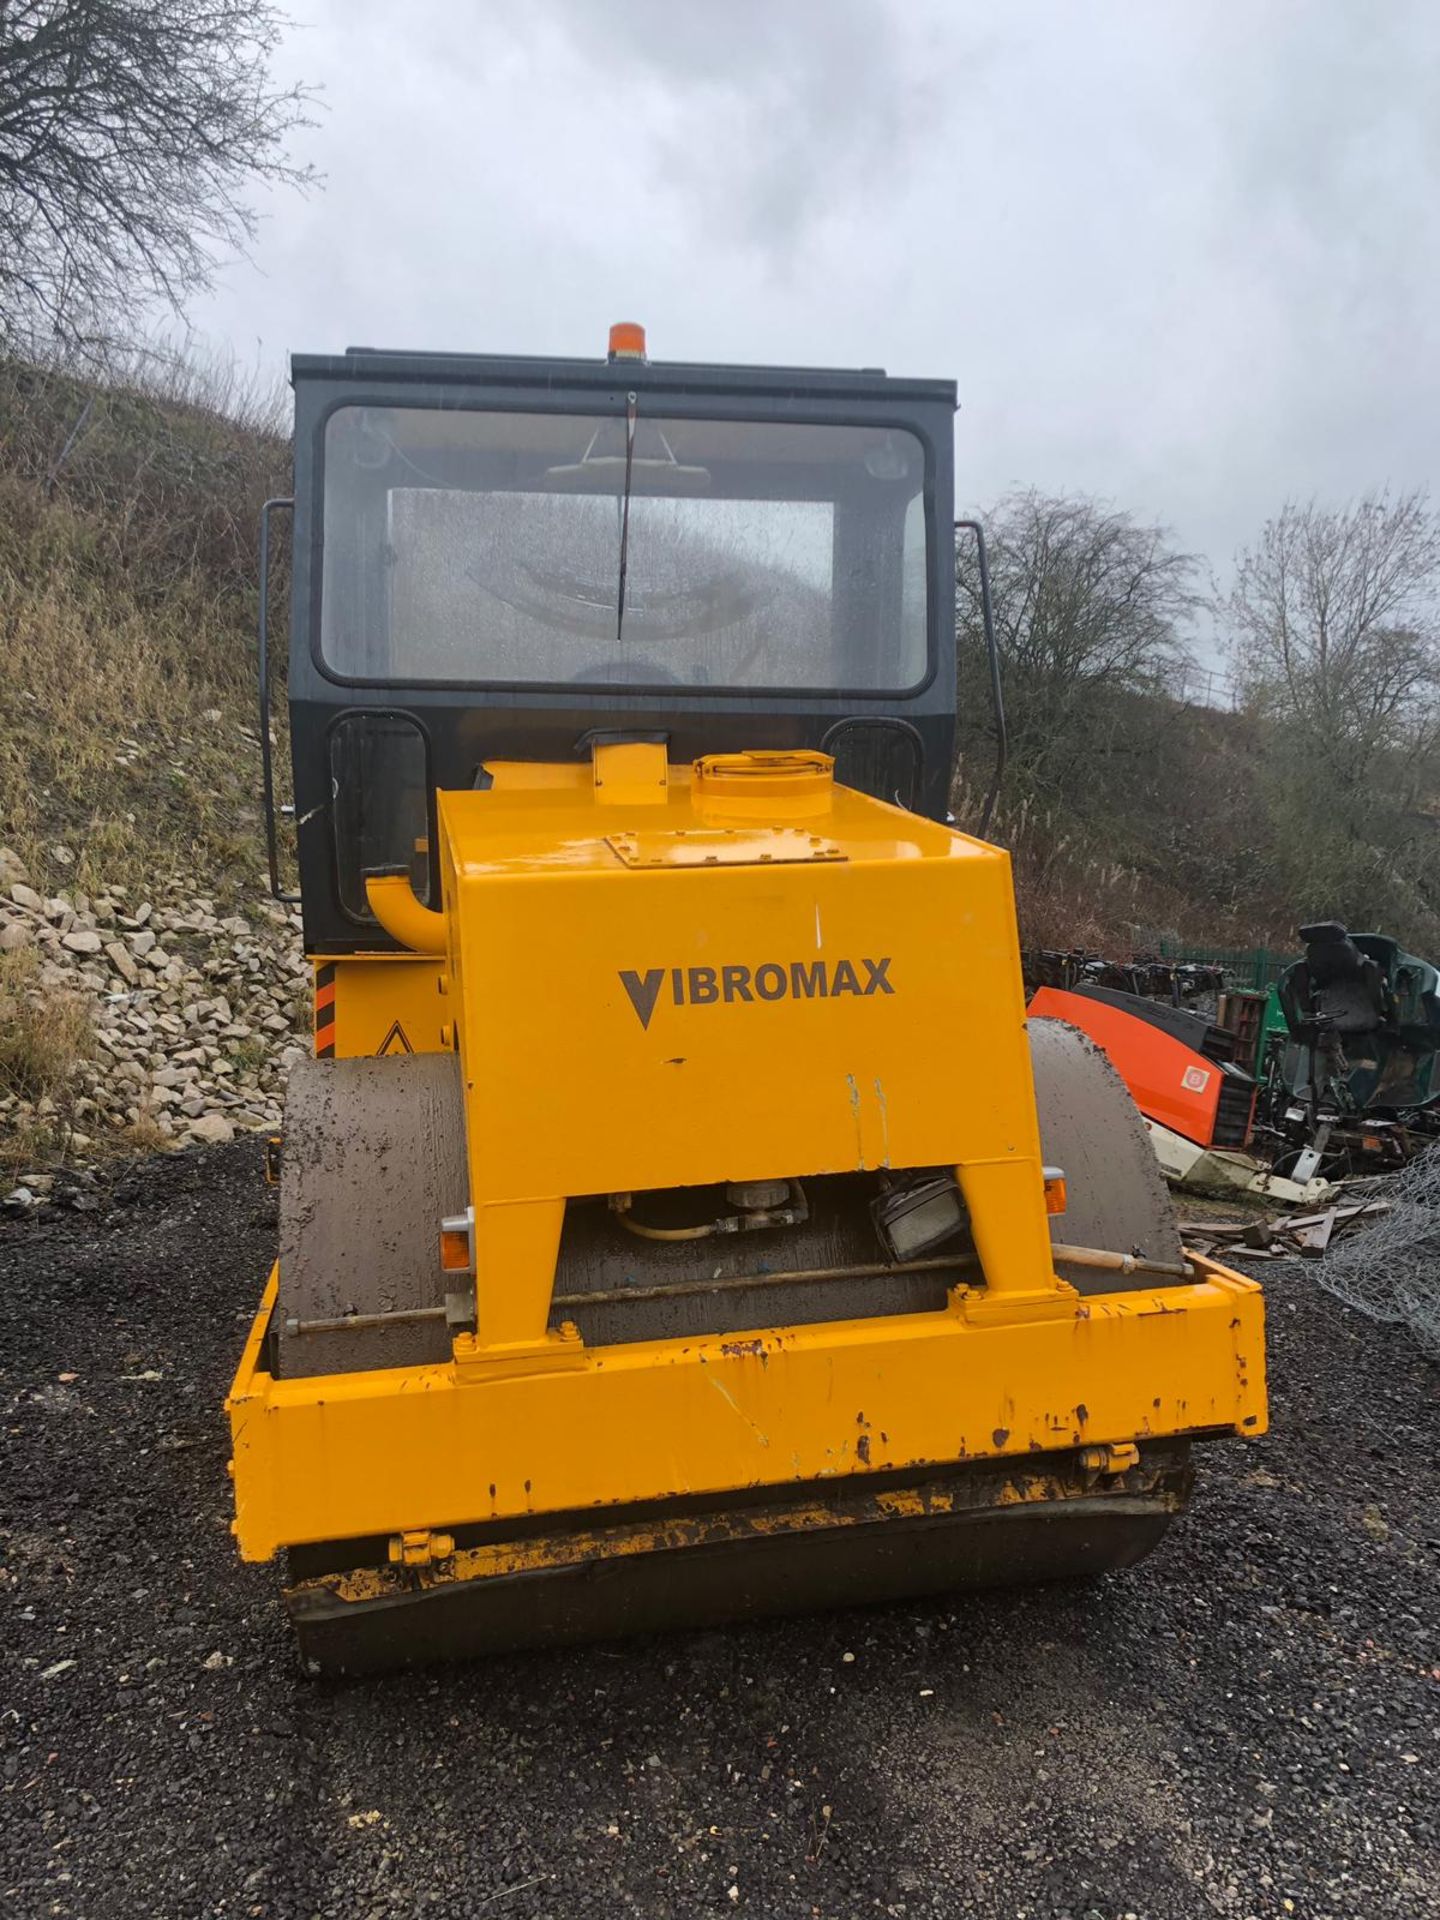 VIBROMAX W752 ROLLER, YEAR UNKNOWN, RUNS WORKS AND VIBRATES *PLUS VAT* - Image 5 of 11